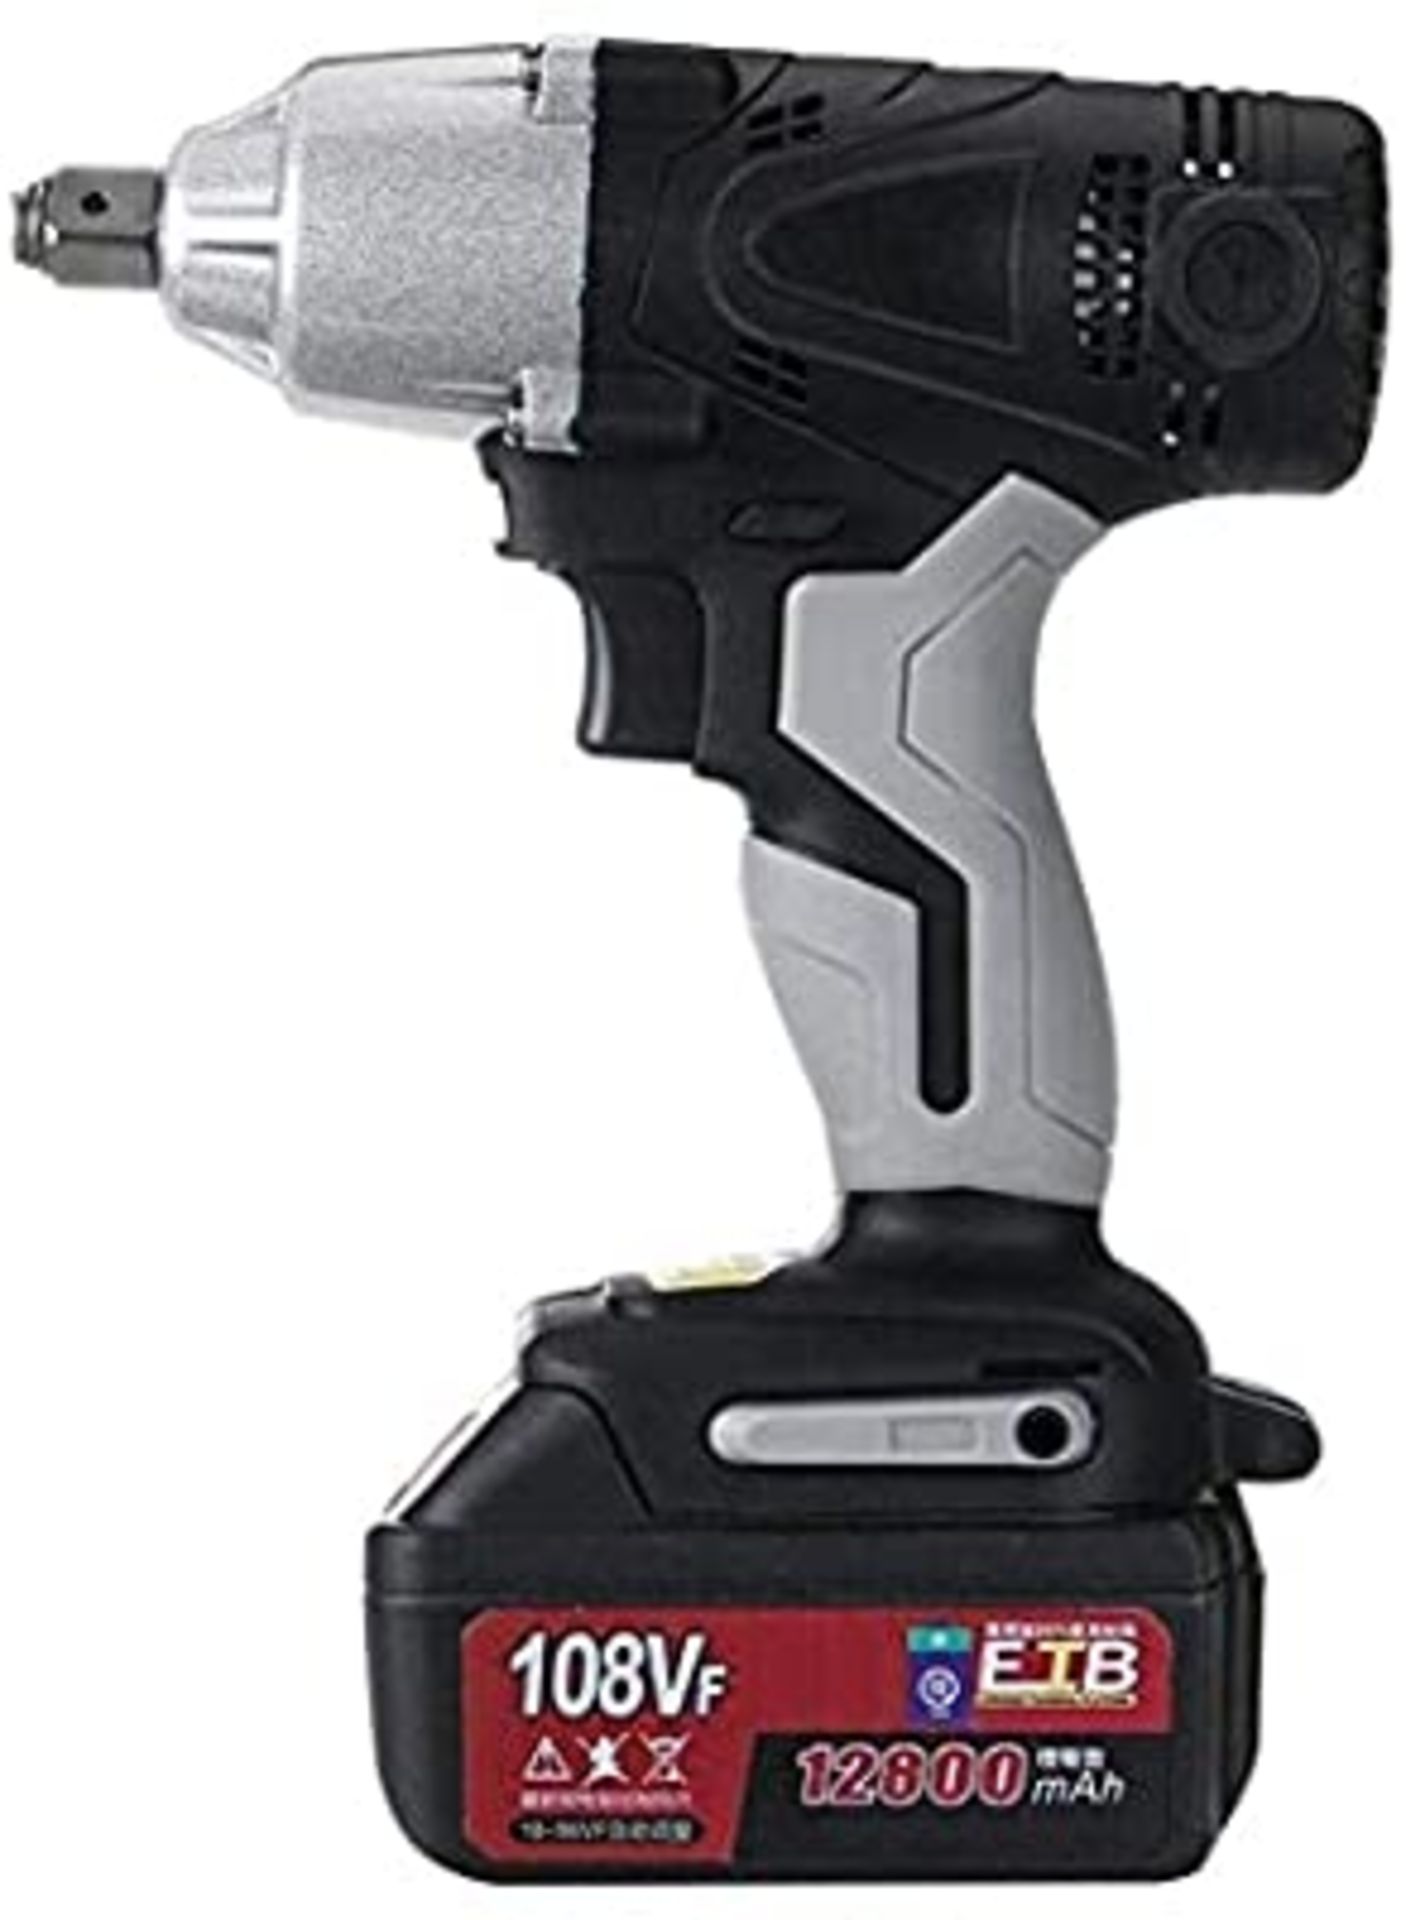 108Vf 12800Mah Cordless Electric Impact Wrench Drill Driver W/ Lithium-Ion Battery - Image 3 of 4